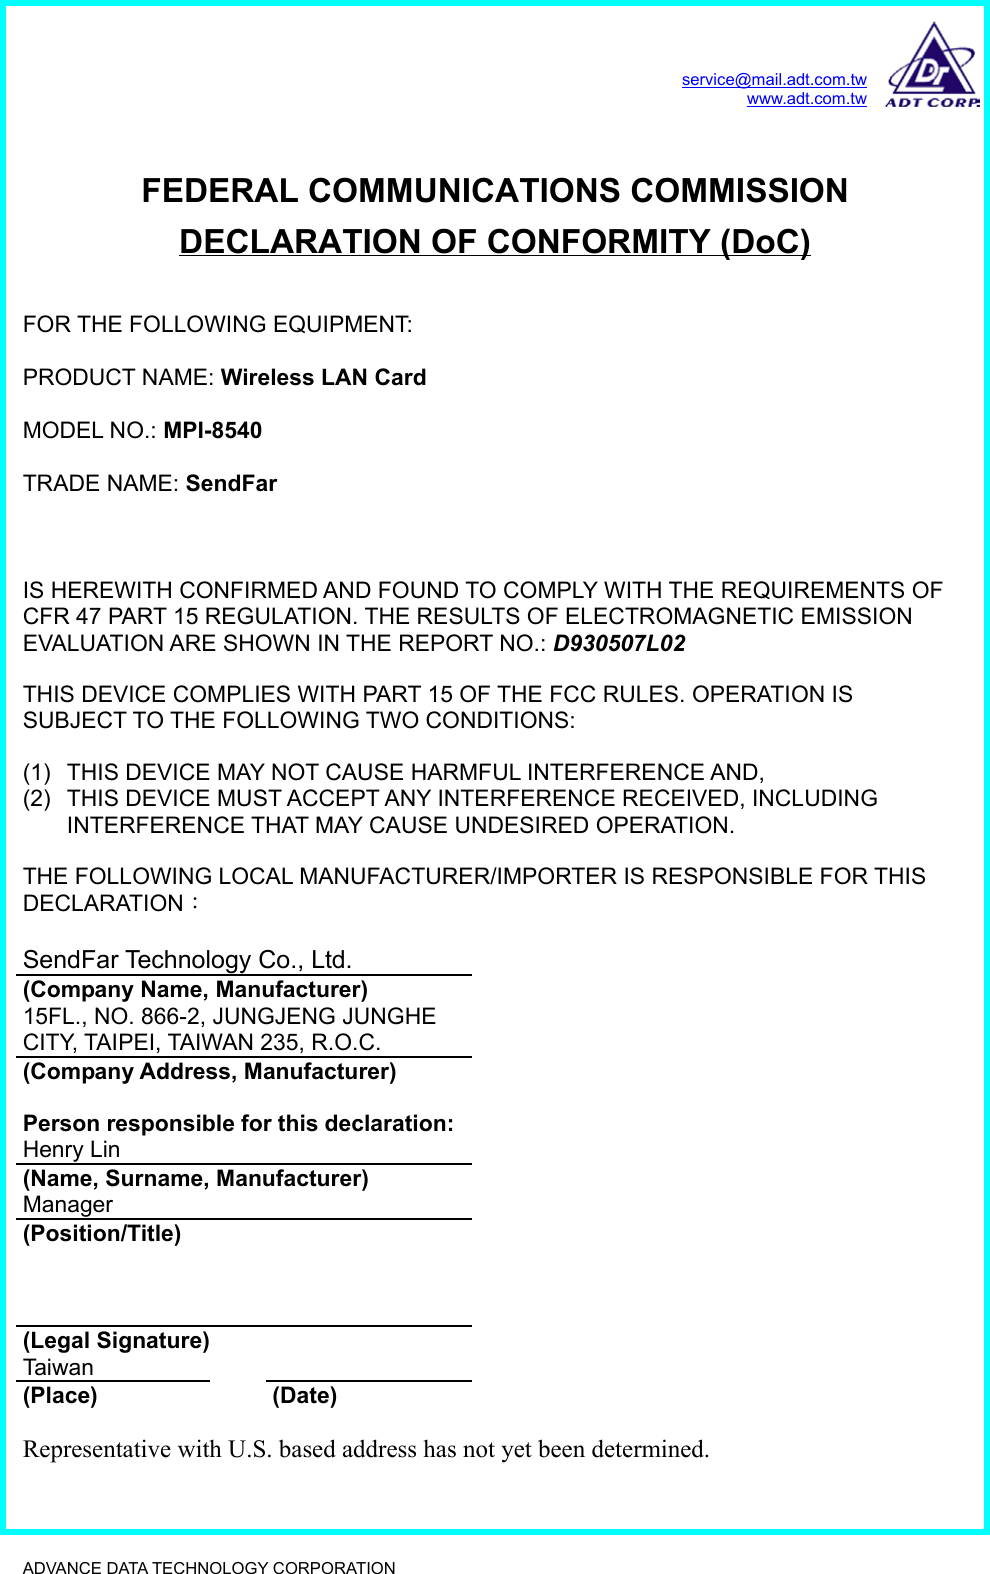 service@mail.adt.com.twwww.adt.com.twADVANCE DATA TECHNOLOGY CORPORATION              FEDERAL COMMUNICATIONS COMMISSIONDECLARATION OF CONFORMITY (DoC)FOR THE FOLLOWING EQUIPMENT:PRODUCT NAME: Wireless LAN CardMODEL NO.: MPI-8540TRADE NAME: SendFarIS HEREWITH CONFIRMED AND FOUND TO COMPLY WITH THE REQUIREMENTS OFCFR 47 PART 15 REGULATION. THE RESULTS OF ELECTROMAGNETIC EMISSIONEVALUATION ARE SHOWN IN THE REPORT NO.: D930507L02THIS DEVICE COMPLIES WITH PART 15 OF THE FCC RULES. OPERATION ISSUBJECT TO THE FOLLOWING TWO CONDITIONS:(1)  THIS DEVICE MAY NOT CAUSE HARMFUL INTERFERENCE AND,(2)  THIS DEVICE MUST ACCEPT ANY INTERFERENCE RECEIVED, INCLUDINGINTERFERENCE THAT MAY CAUSE UNDESIRED OPERATION.THE FOLLOWING LOCAL MANUFACTURER/IMPORTER IS RESPONSIBLE FOR THISDECLARATION：SendFar Technology Co., Ltd.(Company Name, Manufacturer)15FL., NO. 866-2, JUNGJENG JUNGHECITY, TAIPEI, TAIWAN 235, R.O.C.(Company Address, Manufacturer)Person responsible for this declaration:Henry Lin(Name, Surname, Manufacturer)Manager(Position/Title)(Legal Signature)Taiwan(Place) (Date)Representative with U.S. based address has not yet been determined.